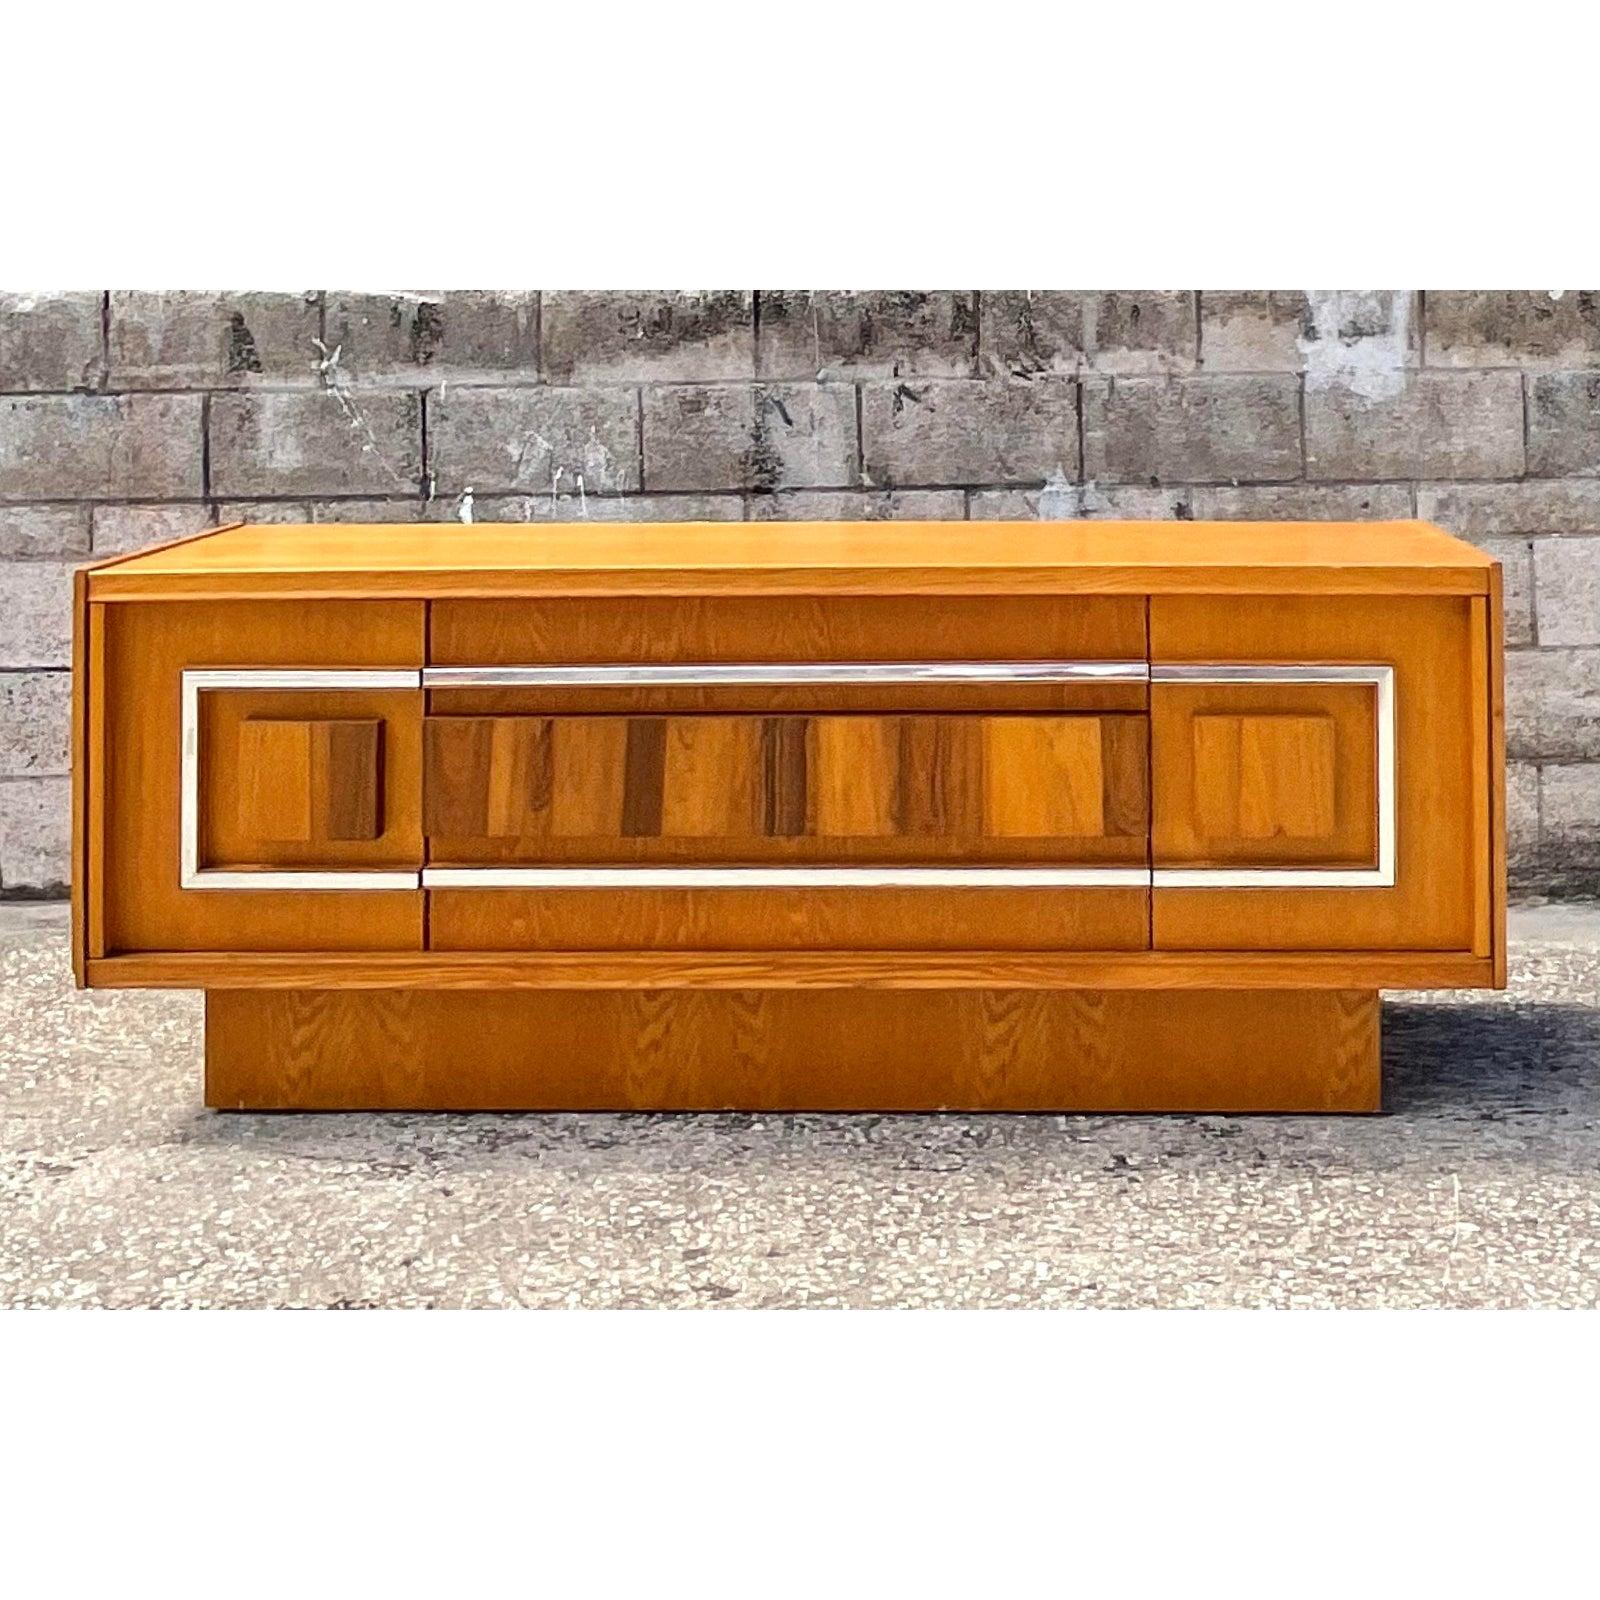 Fantastic vintage MCM credenza. Gorgeous wood grain inset panel with a chrome band surround. Lots of great storage below. Acquired from a Palm Beach estate.